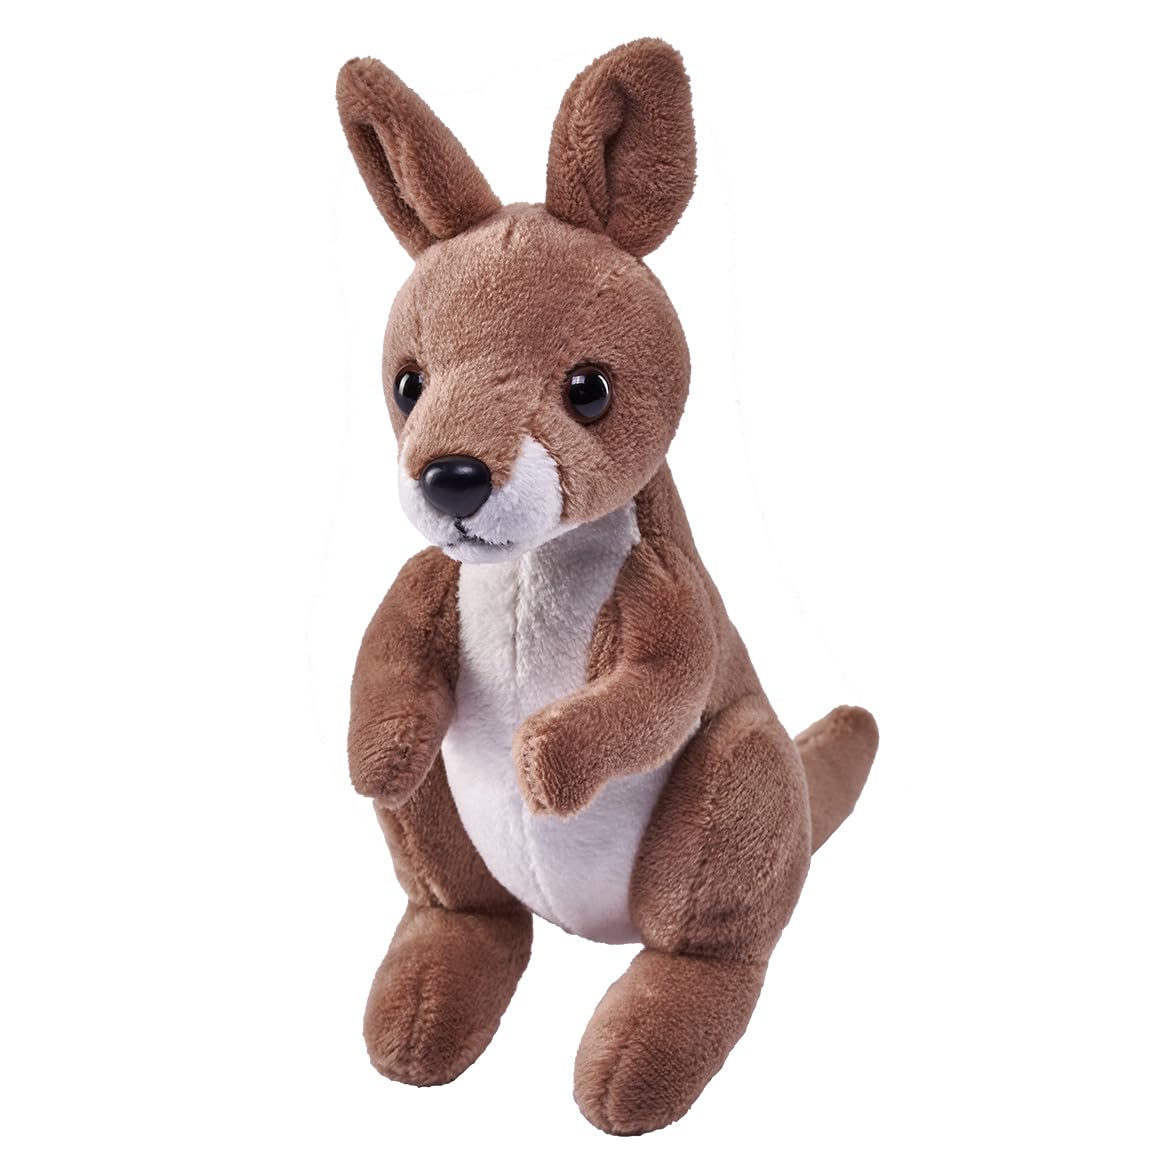 Wild Republic Pocketkins Eco Kangaroo, Stuffed Animal, 5 Inches, Plush Toy, Made from Recycled Materials, Eco Friendly